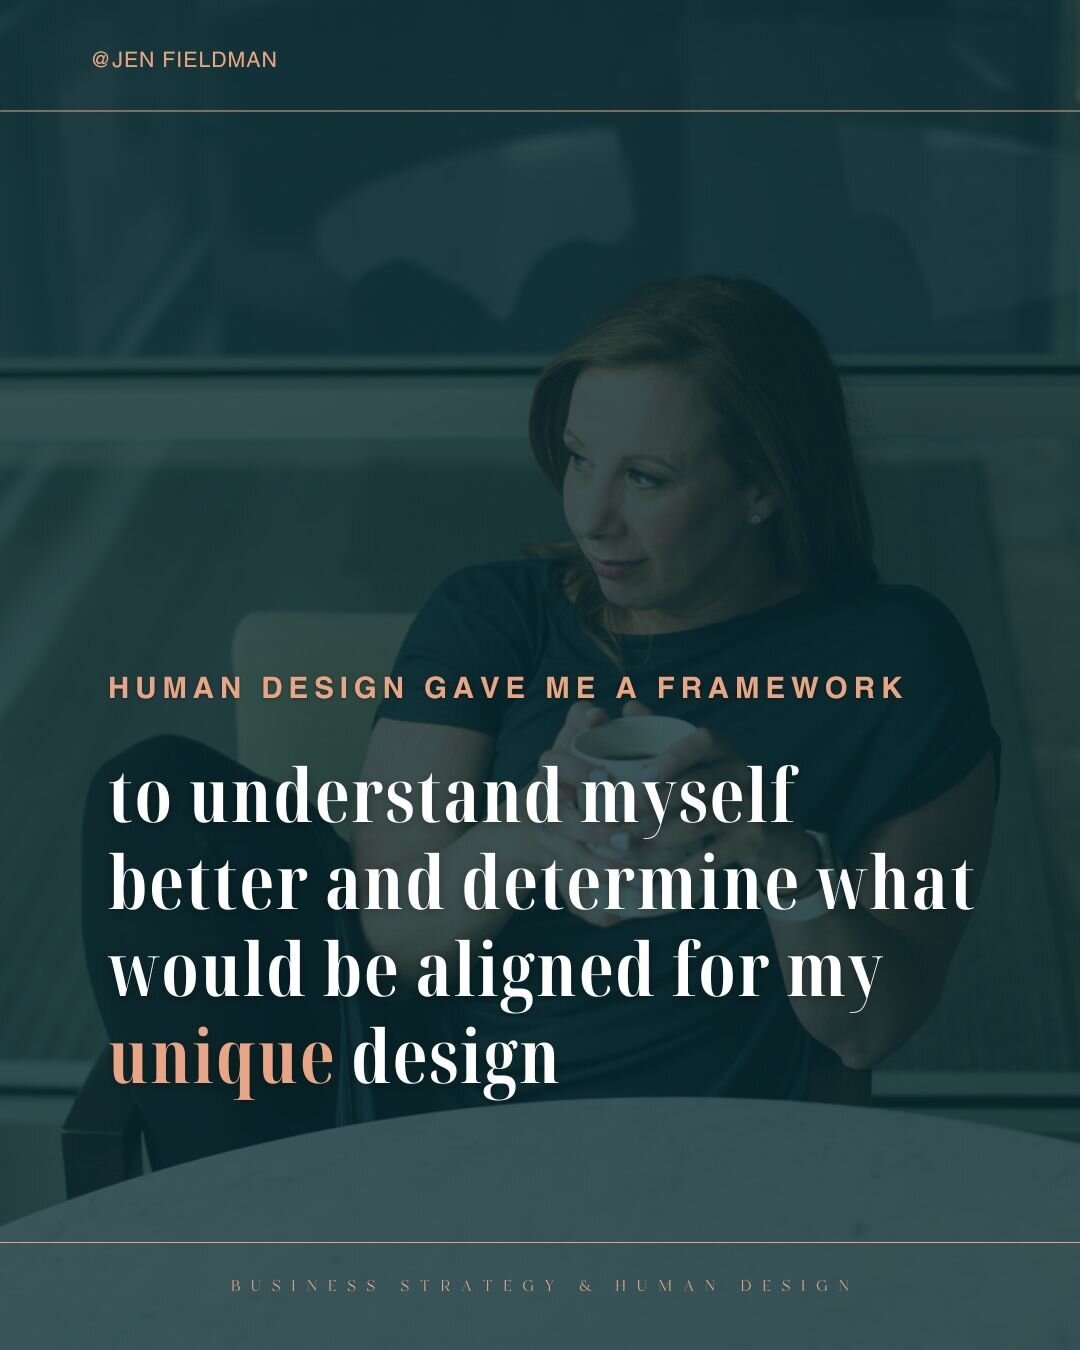 Learning about my #humandesign, made me feel &lsquo;seen.&rsquo;

It helped me understand why I do the things I do, and also gave me incredible self-acceptance. 

I felt at peace with myself for the first time in a long career of feeling frustrated -